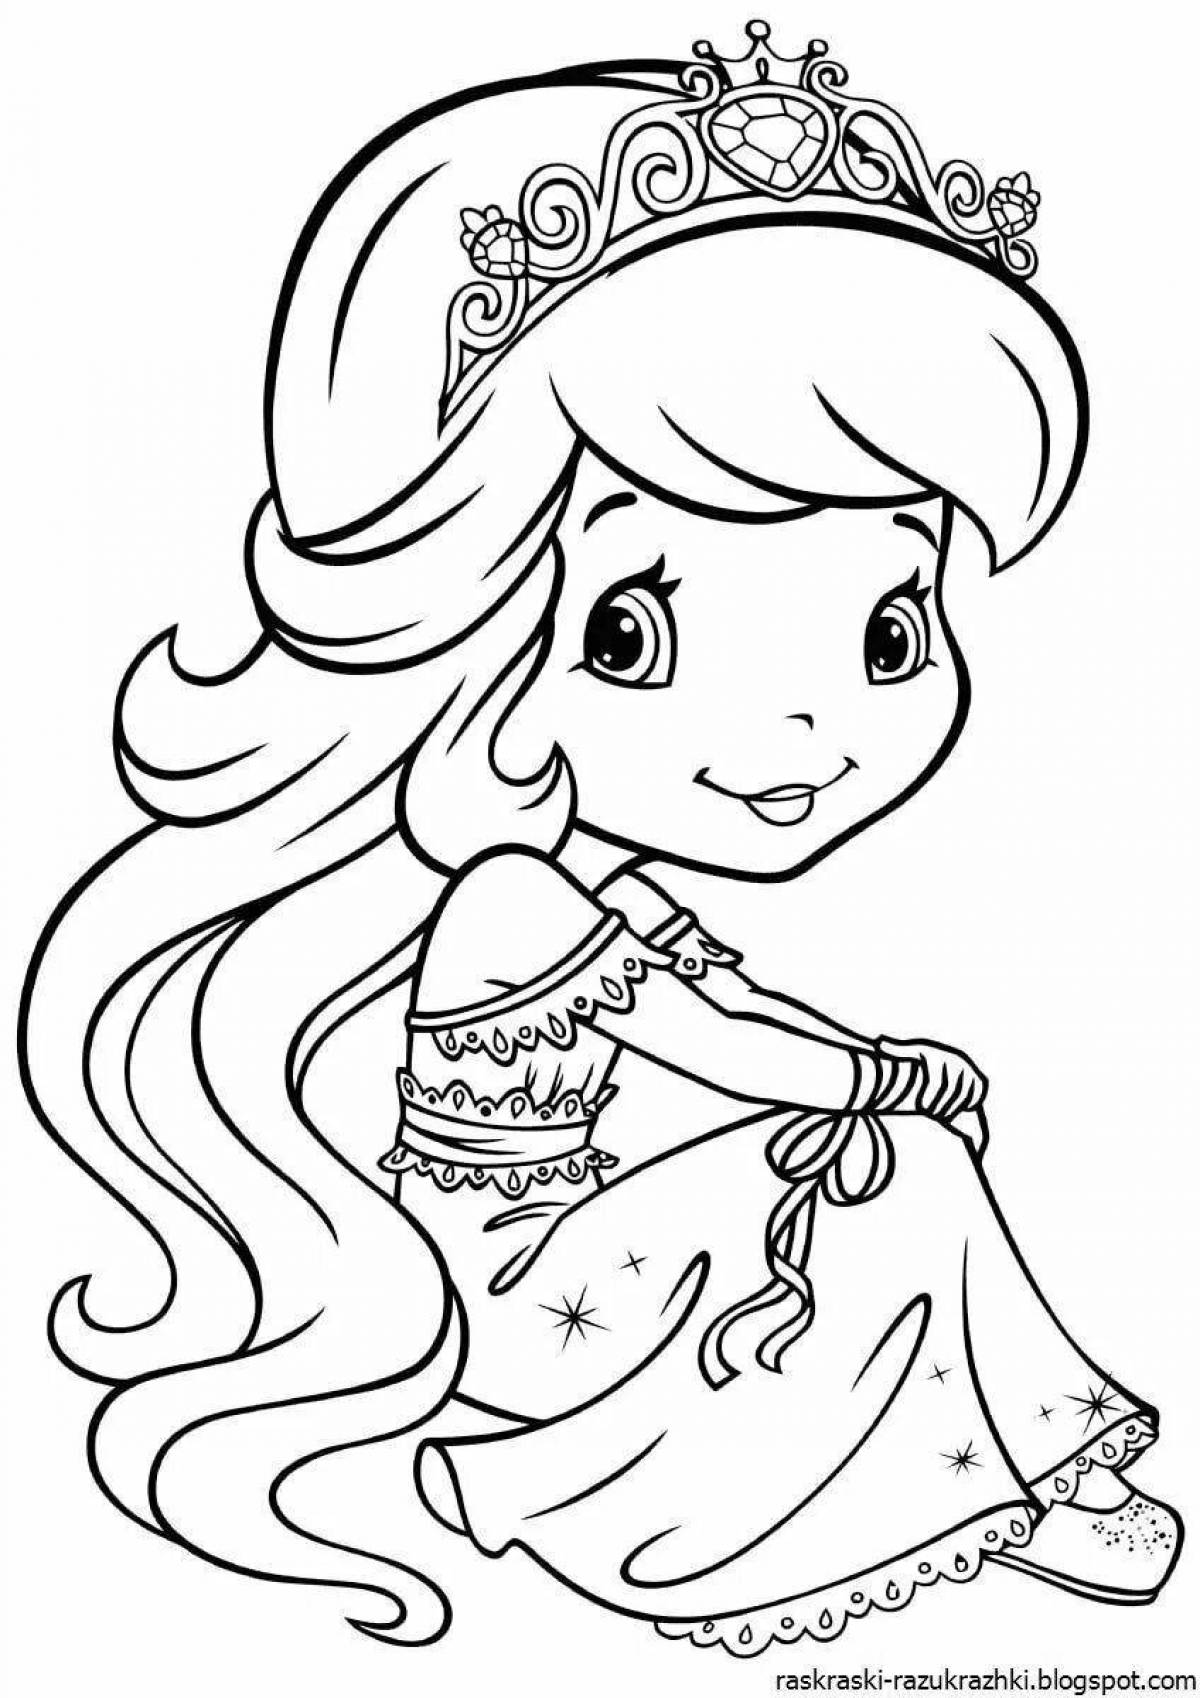 Wonderful princess coloring pages for girls 7 years old